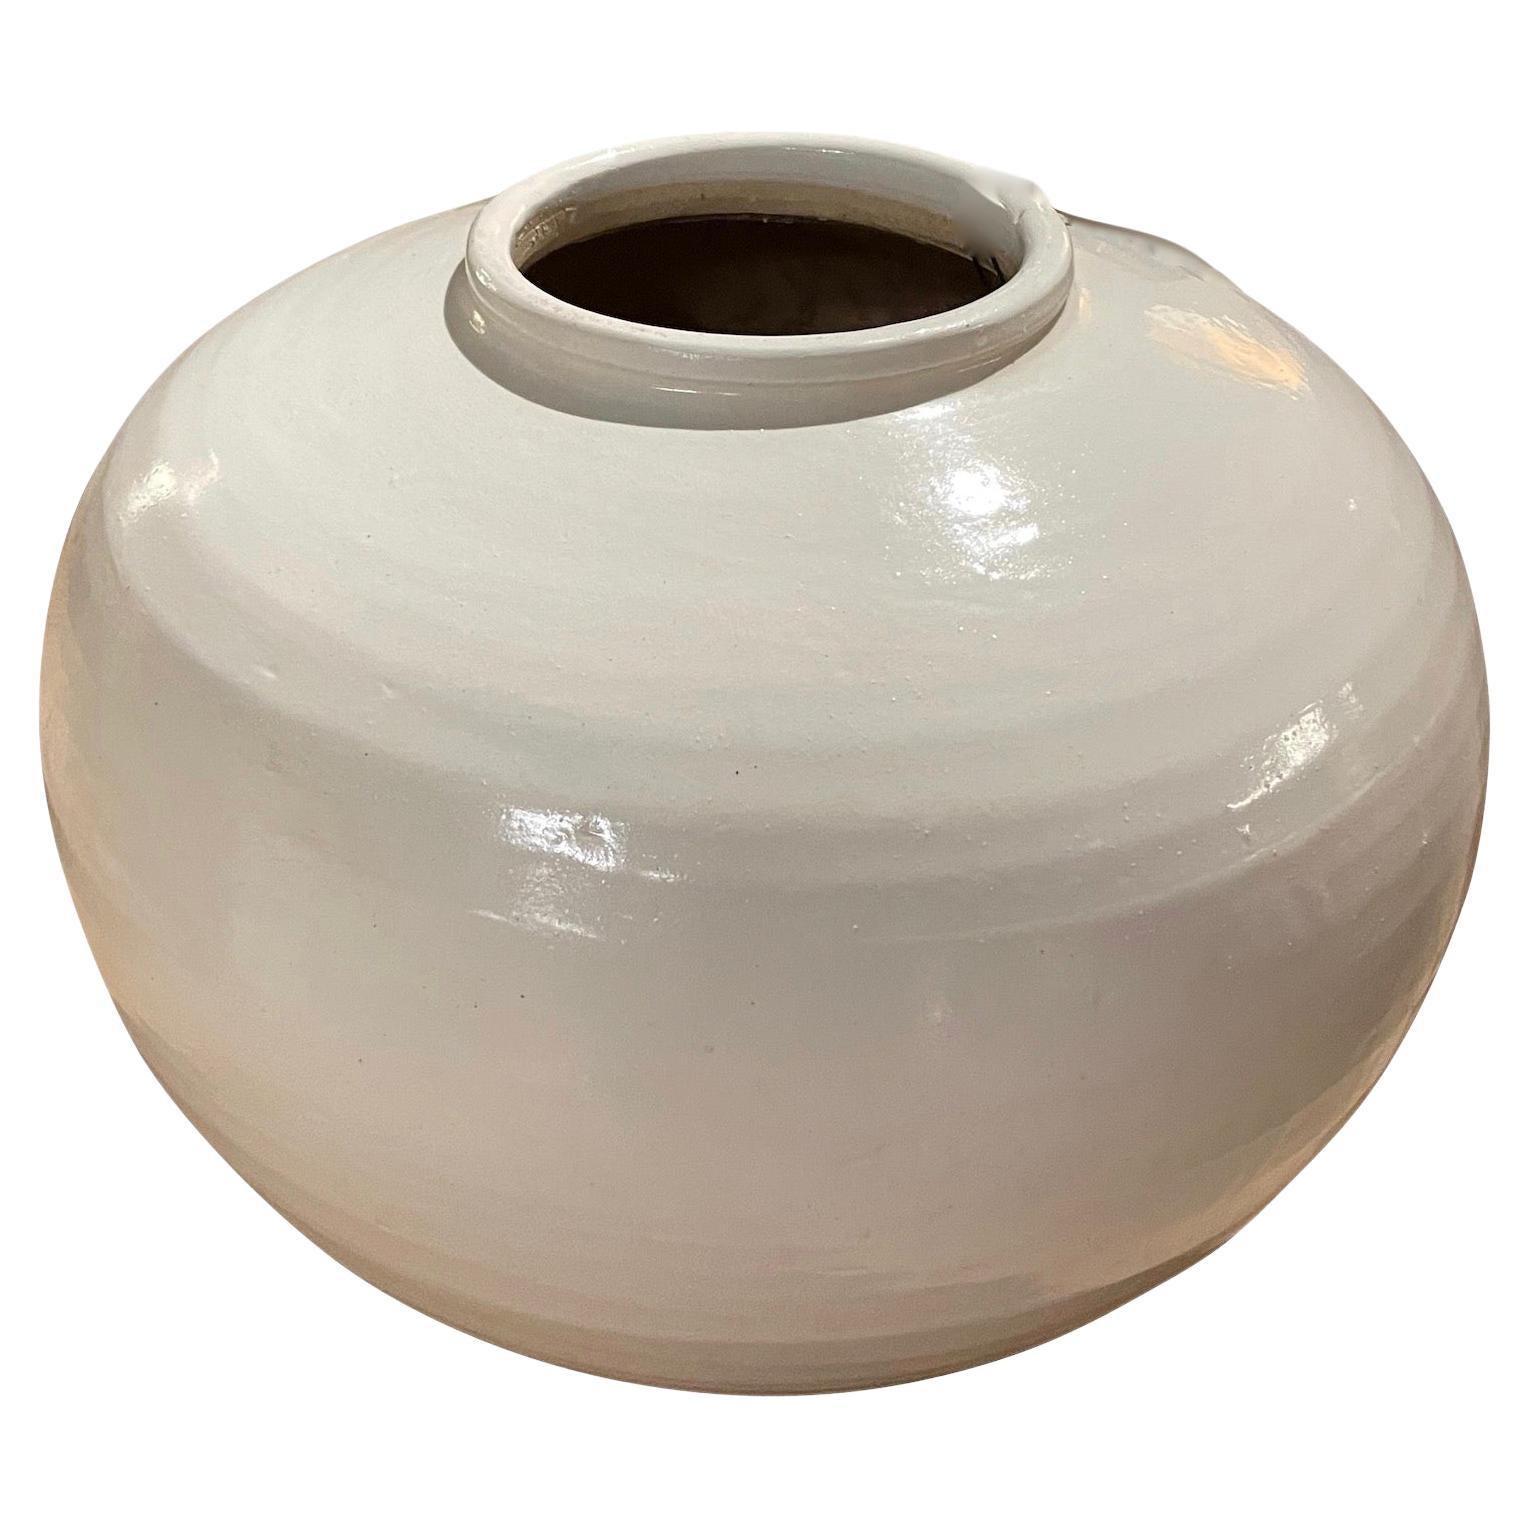 Contemporary Chinese round and squat shaped large white ceramic vase.
From a large collection in a variety of shapes and sizes.